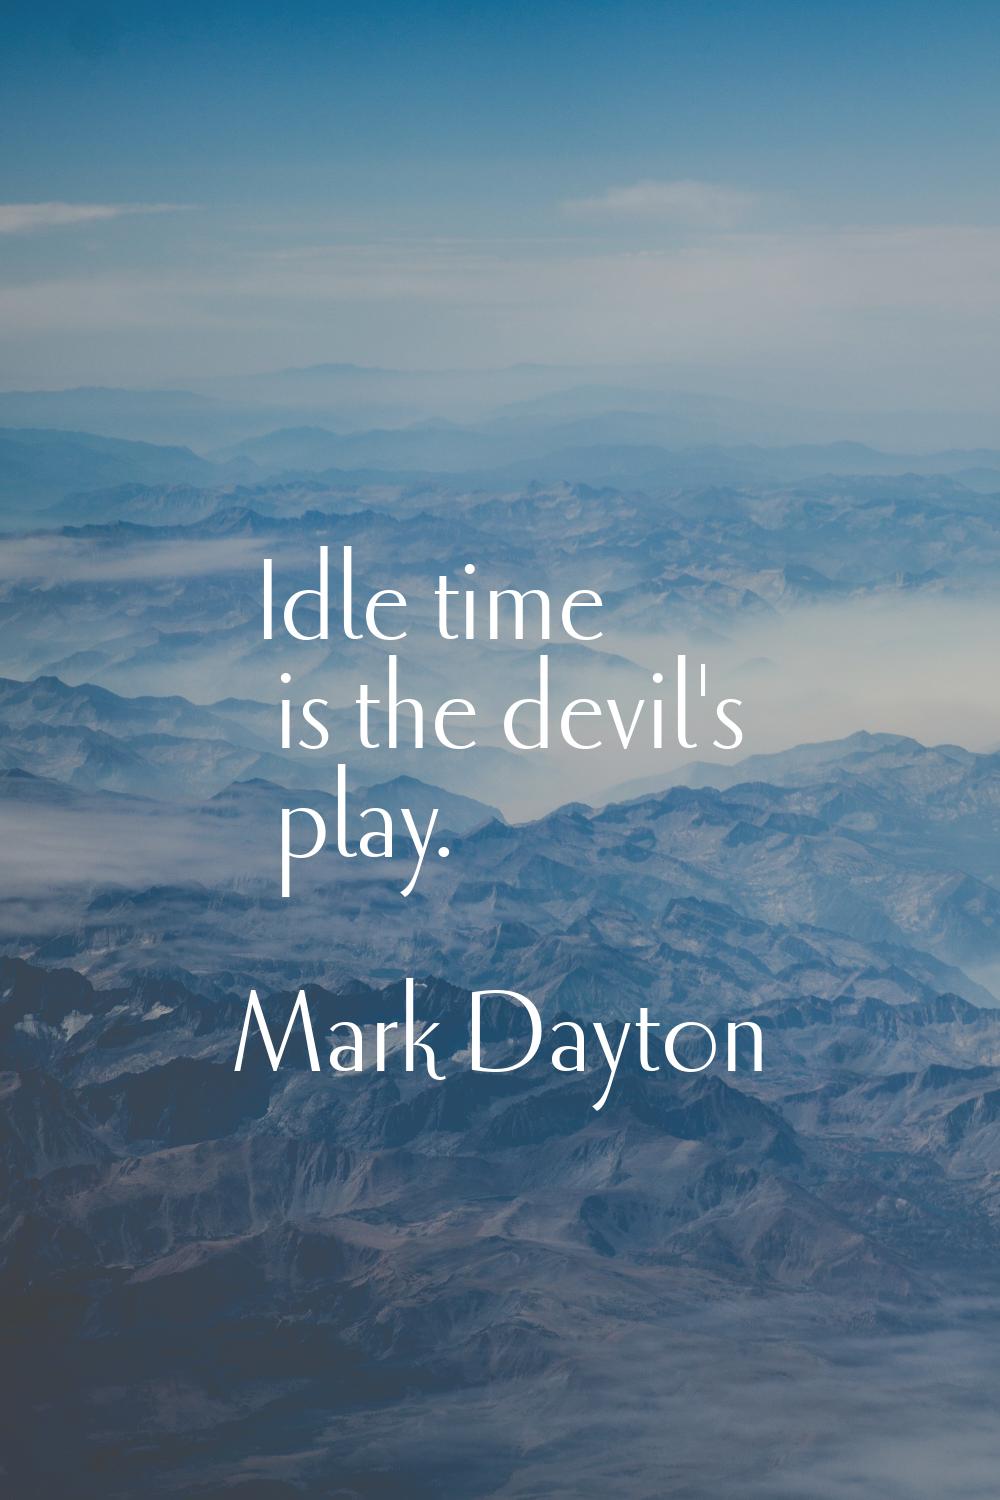 Idle time is the devil's play.